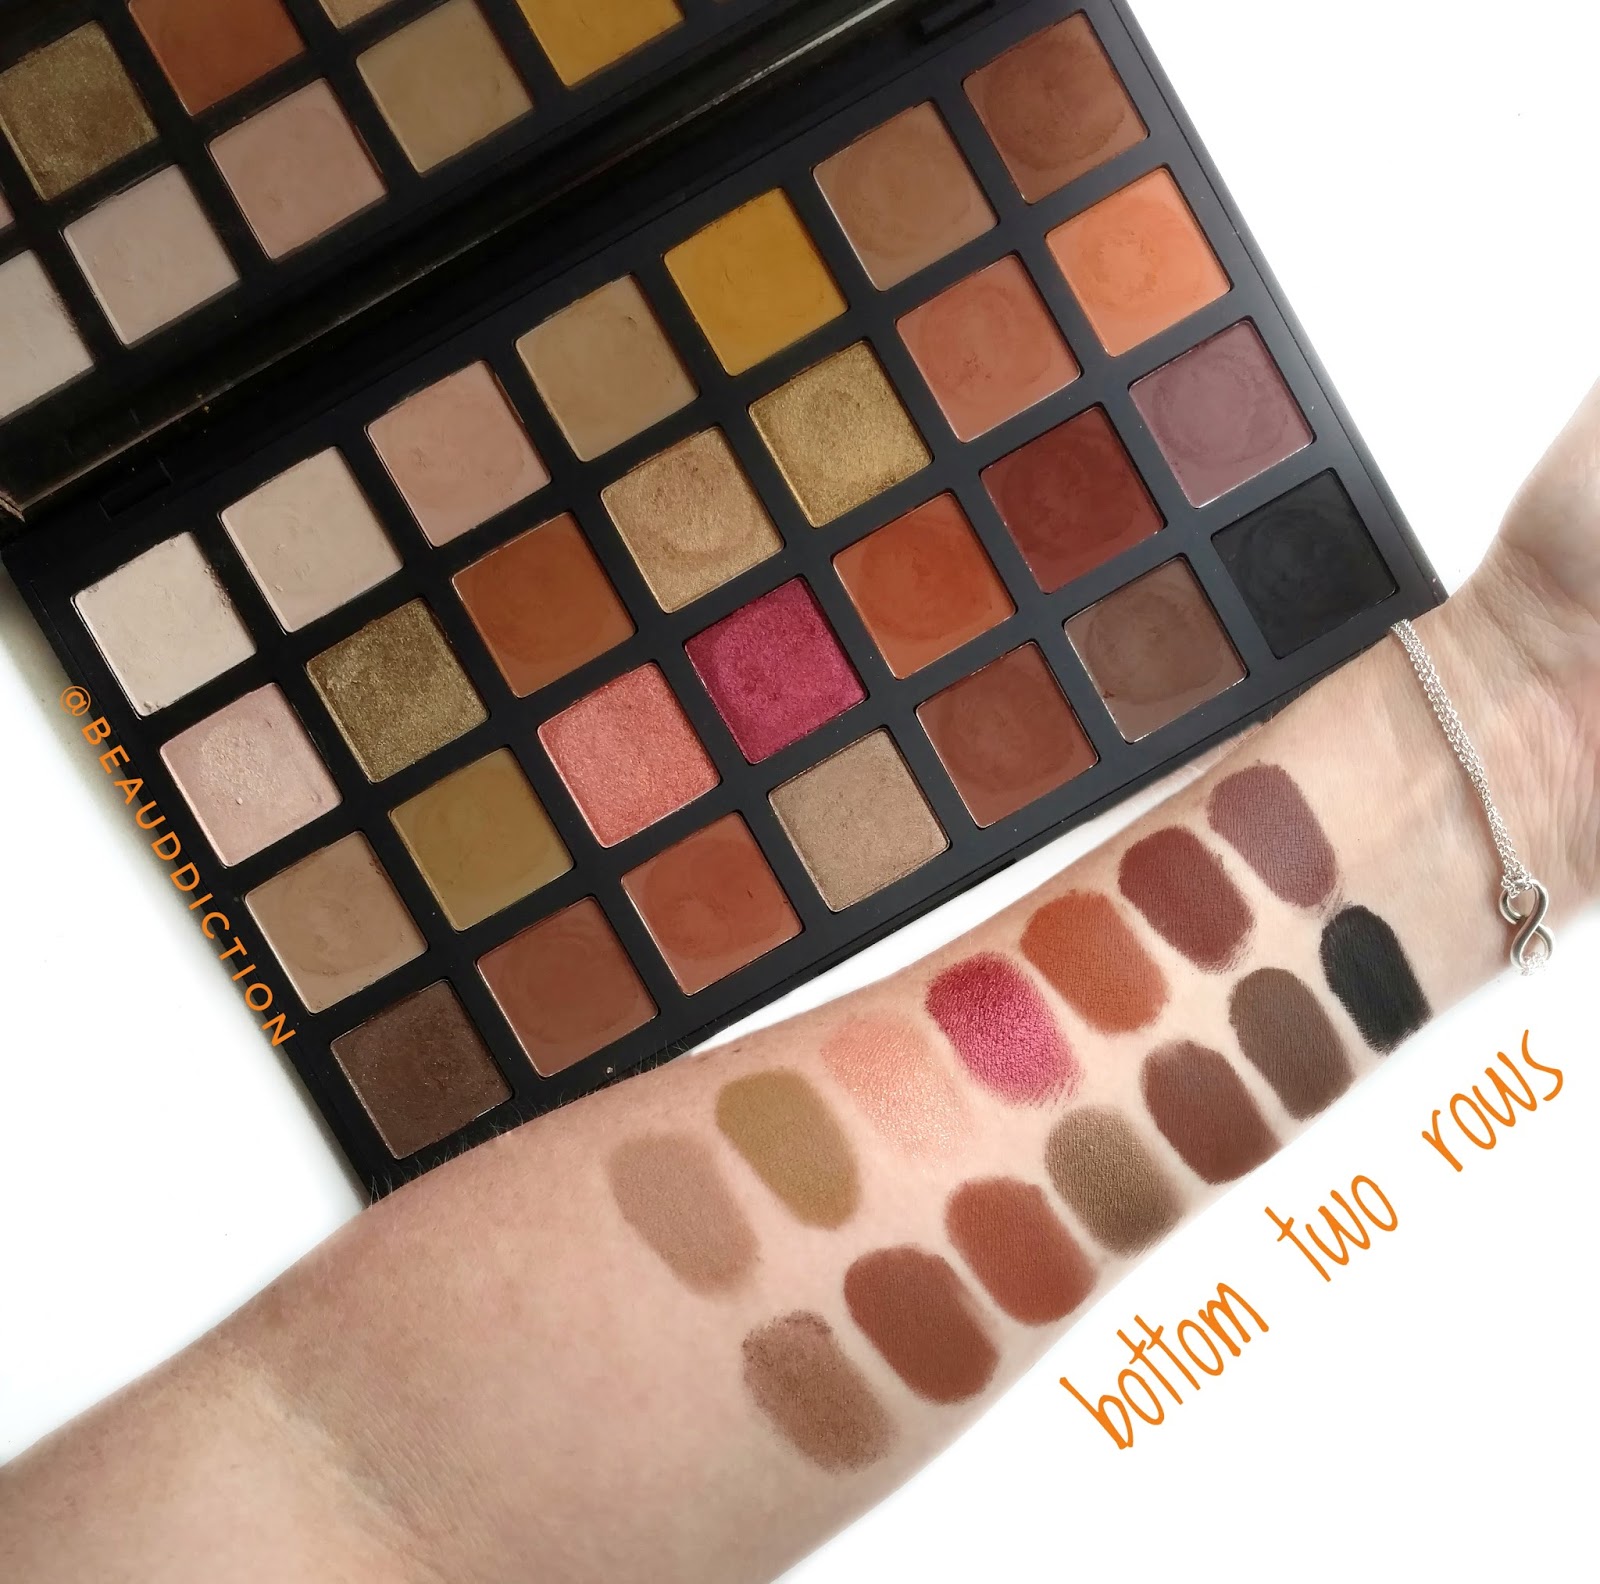 Review Is The New Sephora Pro Warm Eyeshadow Palette Worth The